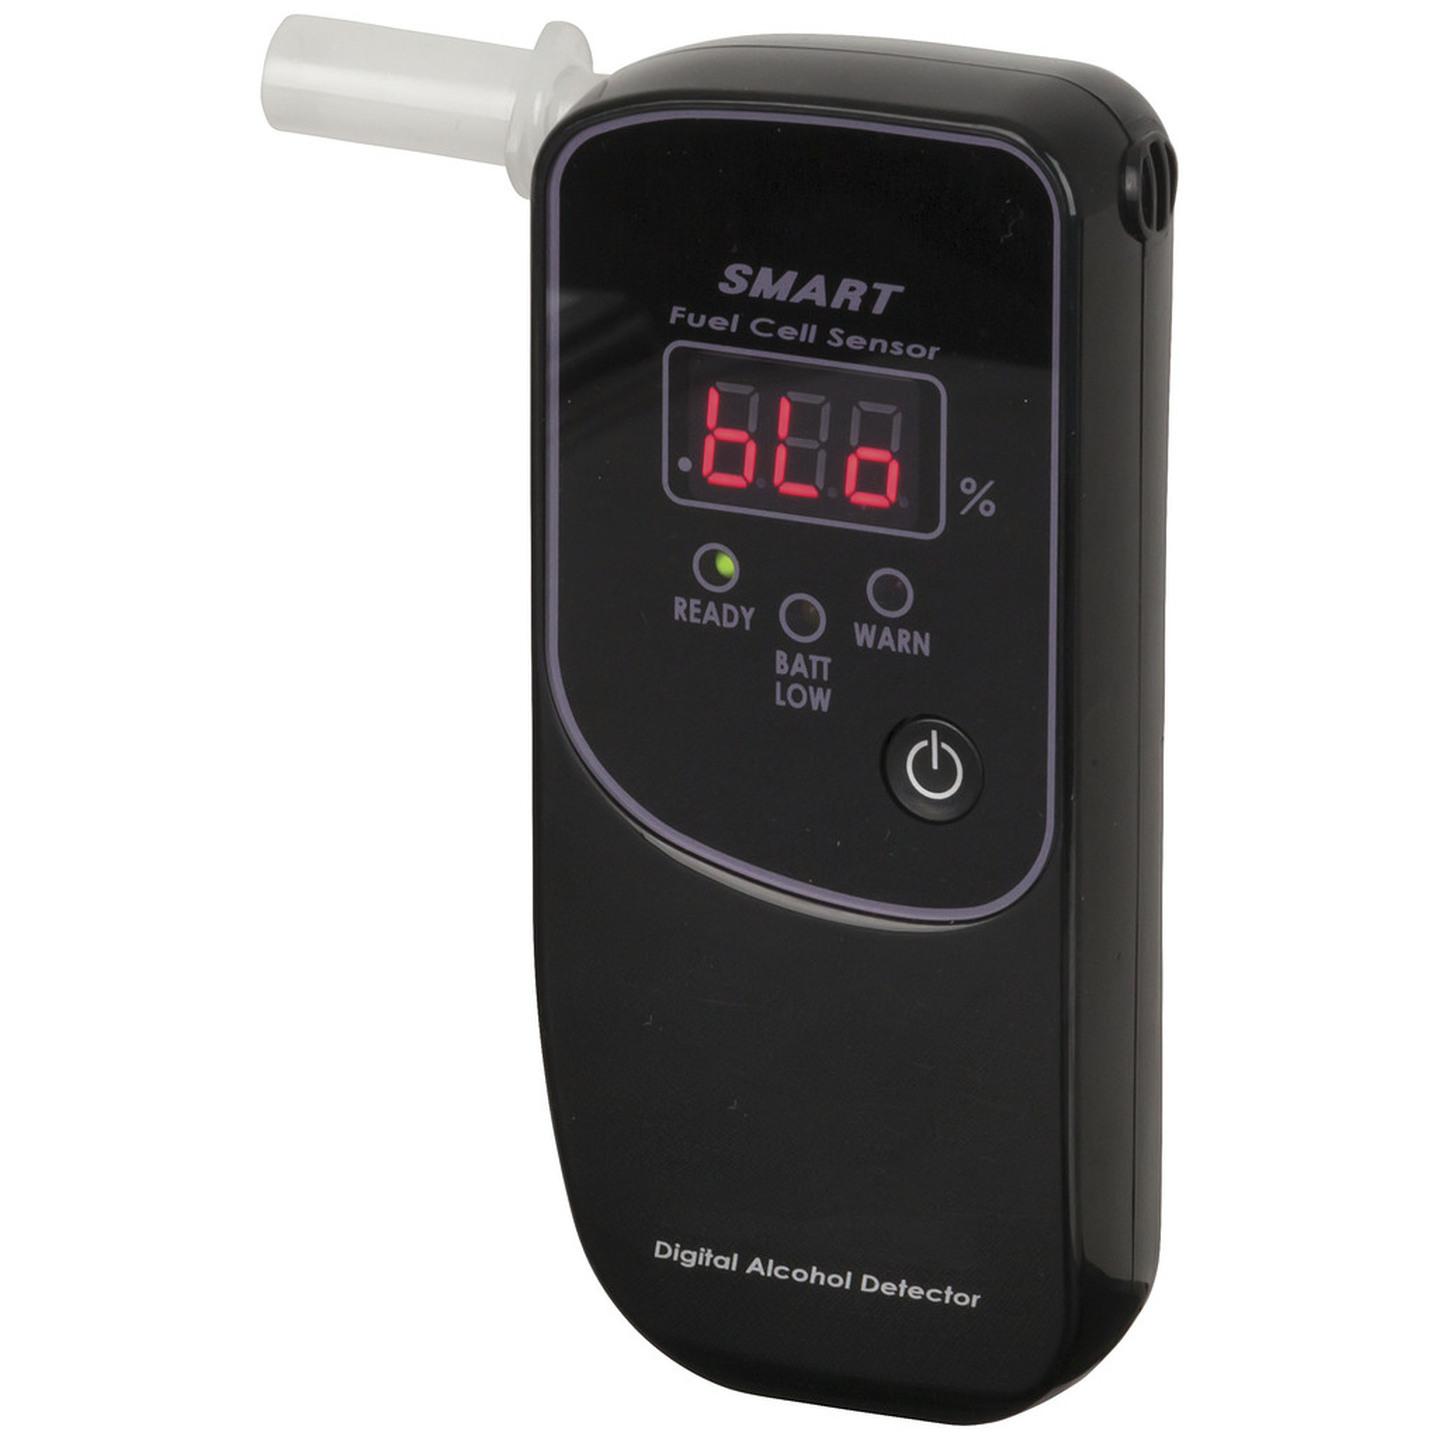 Fuel Cell Breathalyser with LED Display